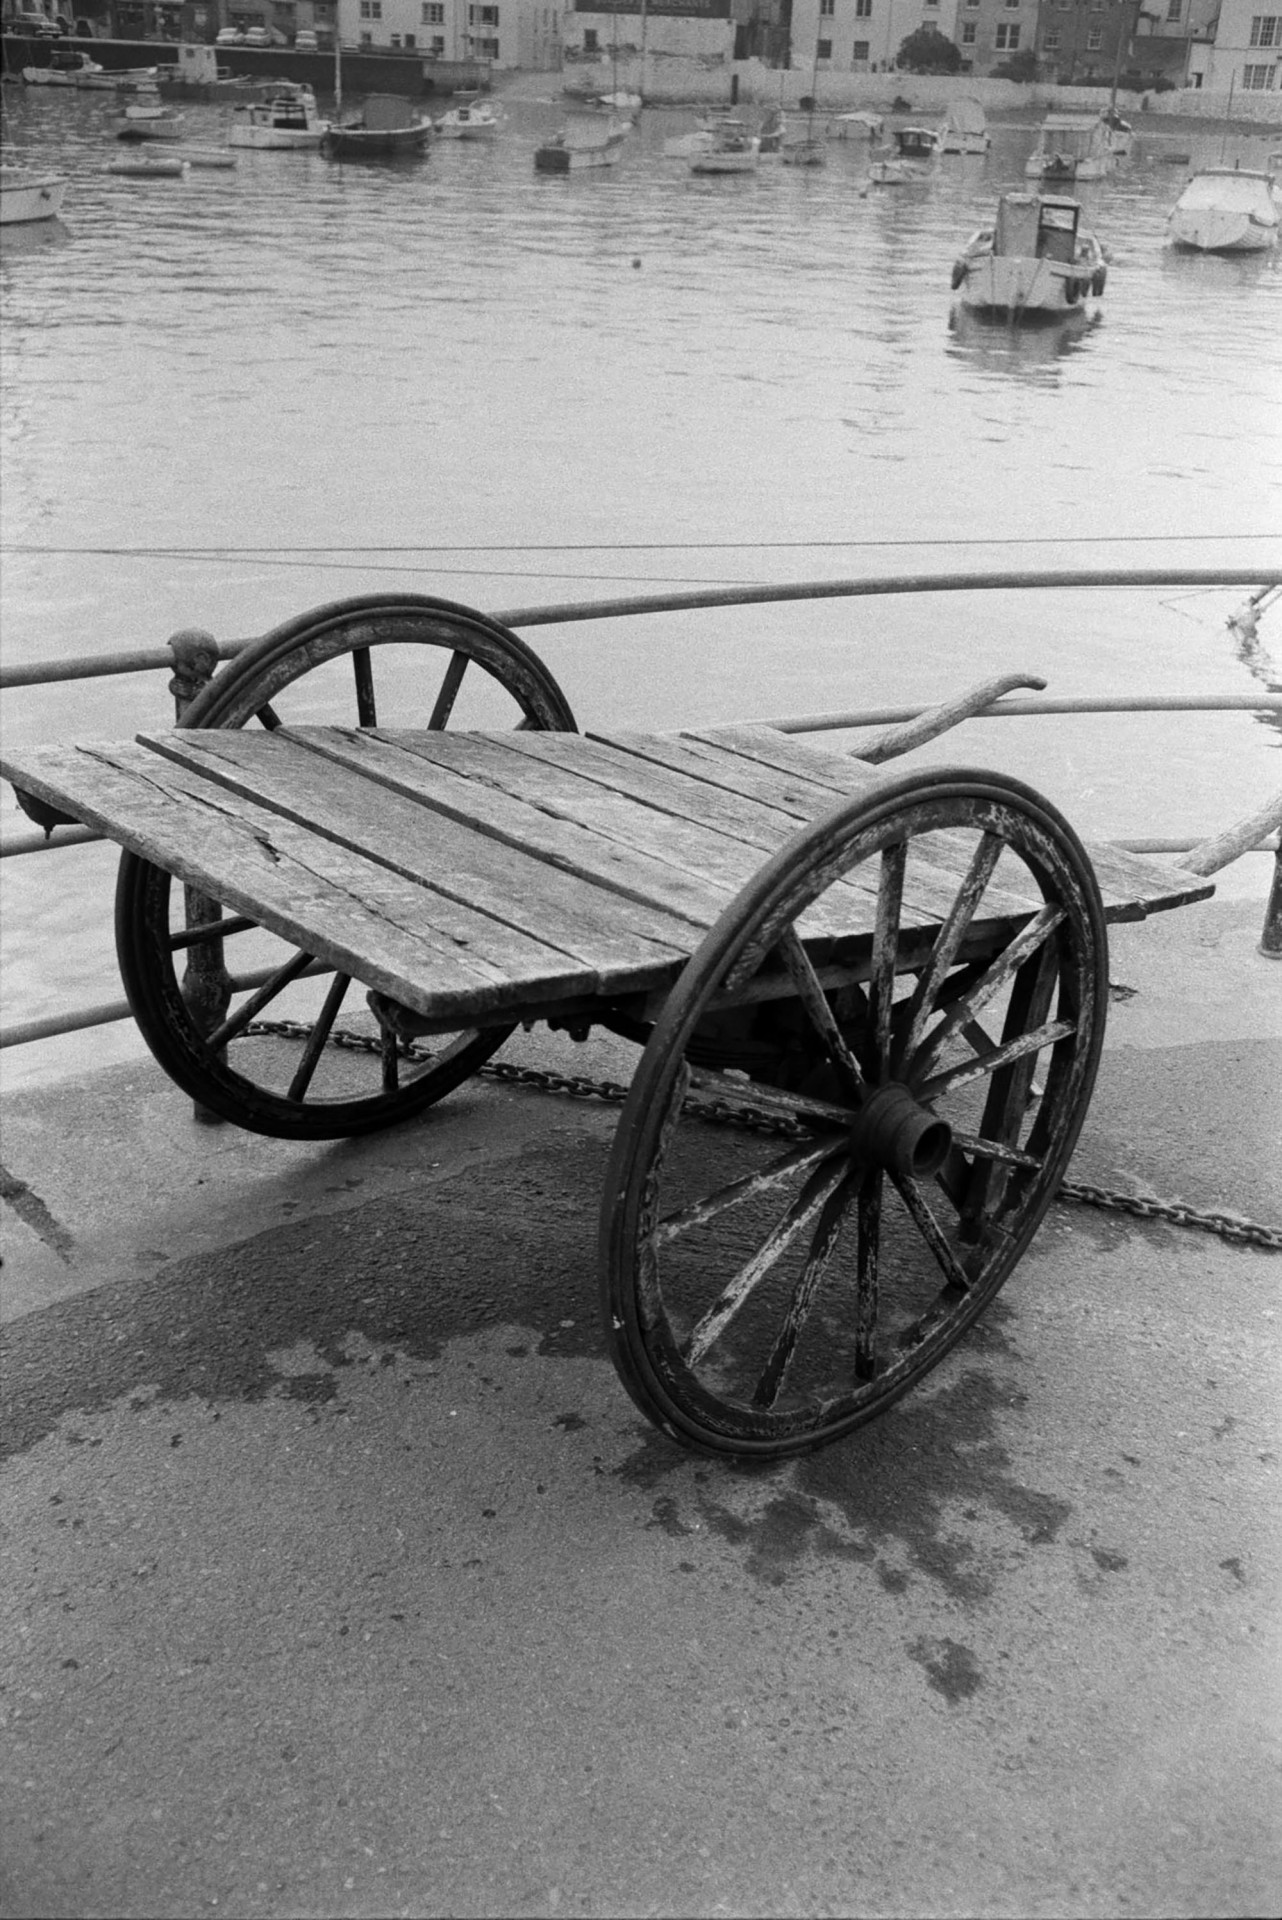 A wooden cart next to the harbour at Ilfracombe. Boats can be seen moored in the harbour.